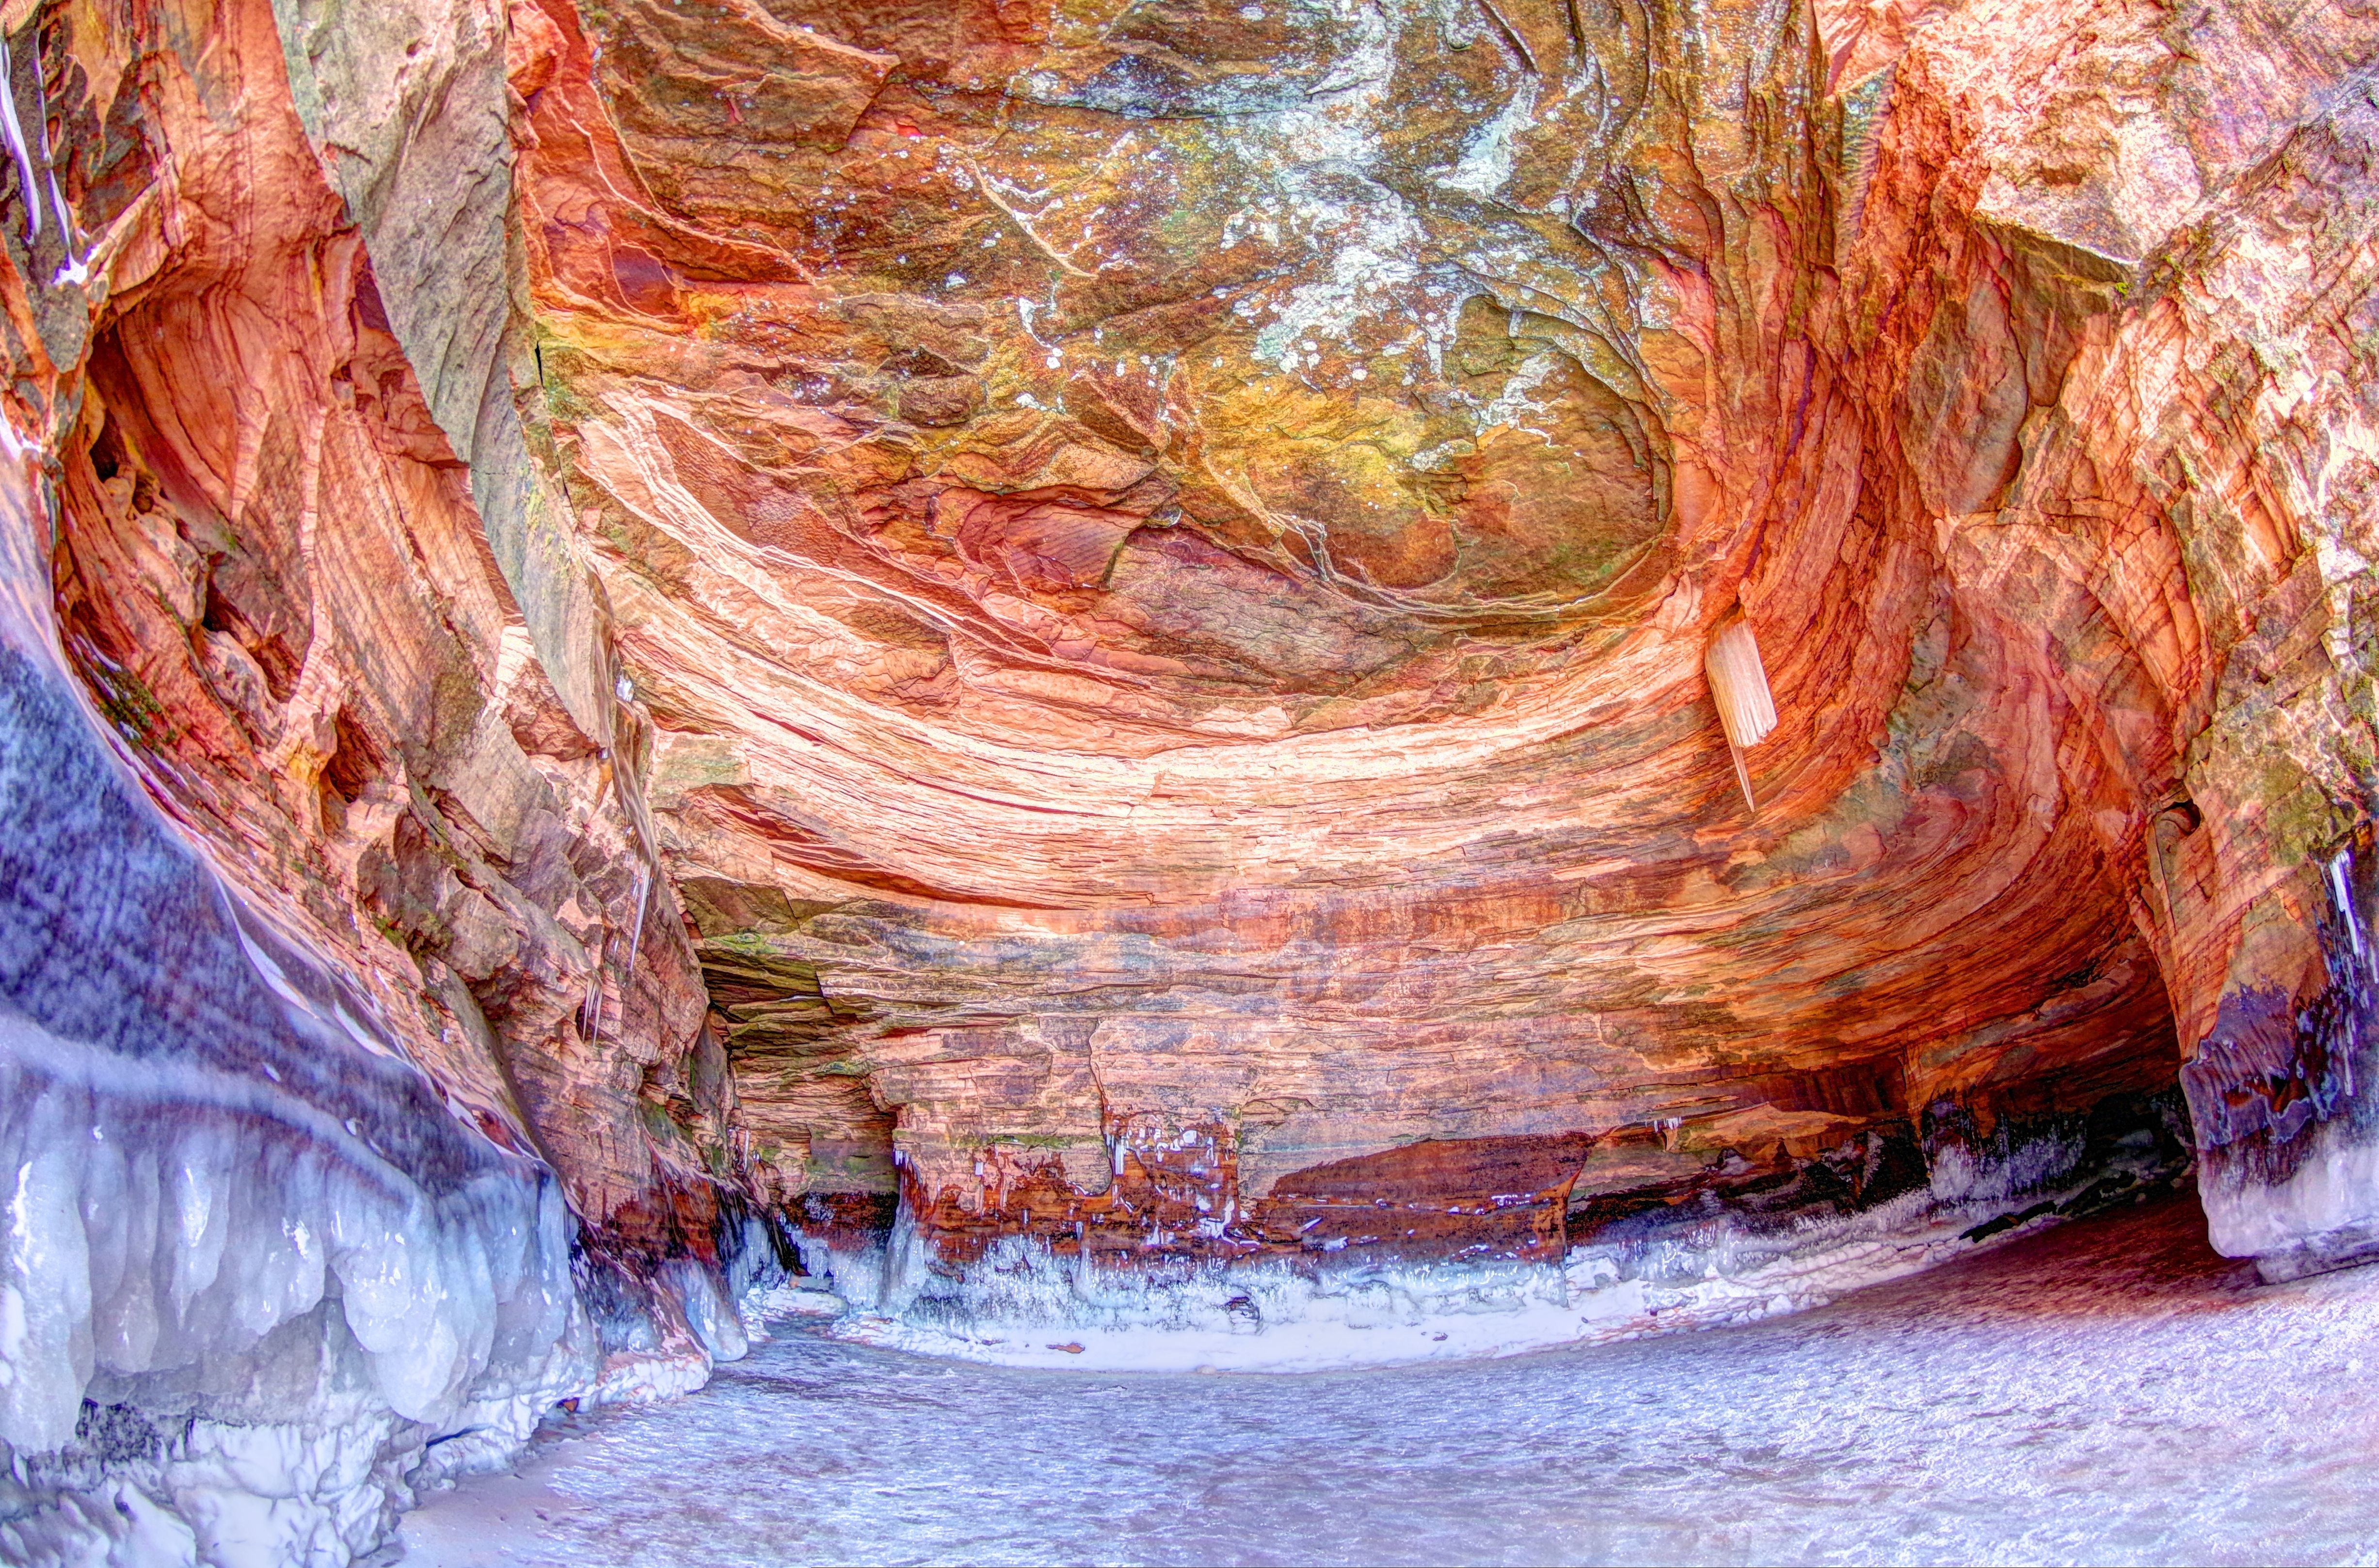 3rd Place "Color of the Ice Cave" by Steve Bensing